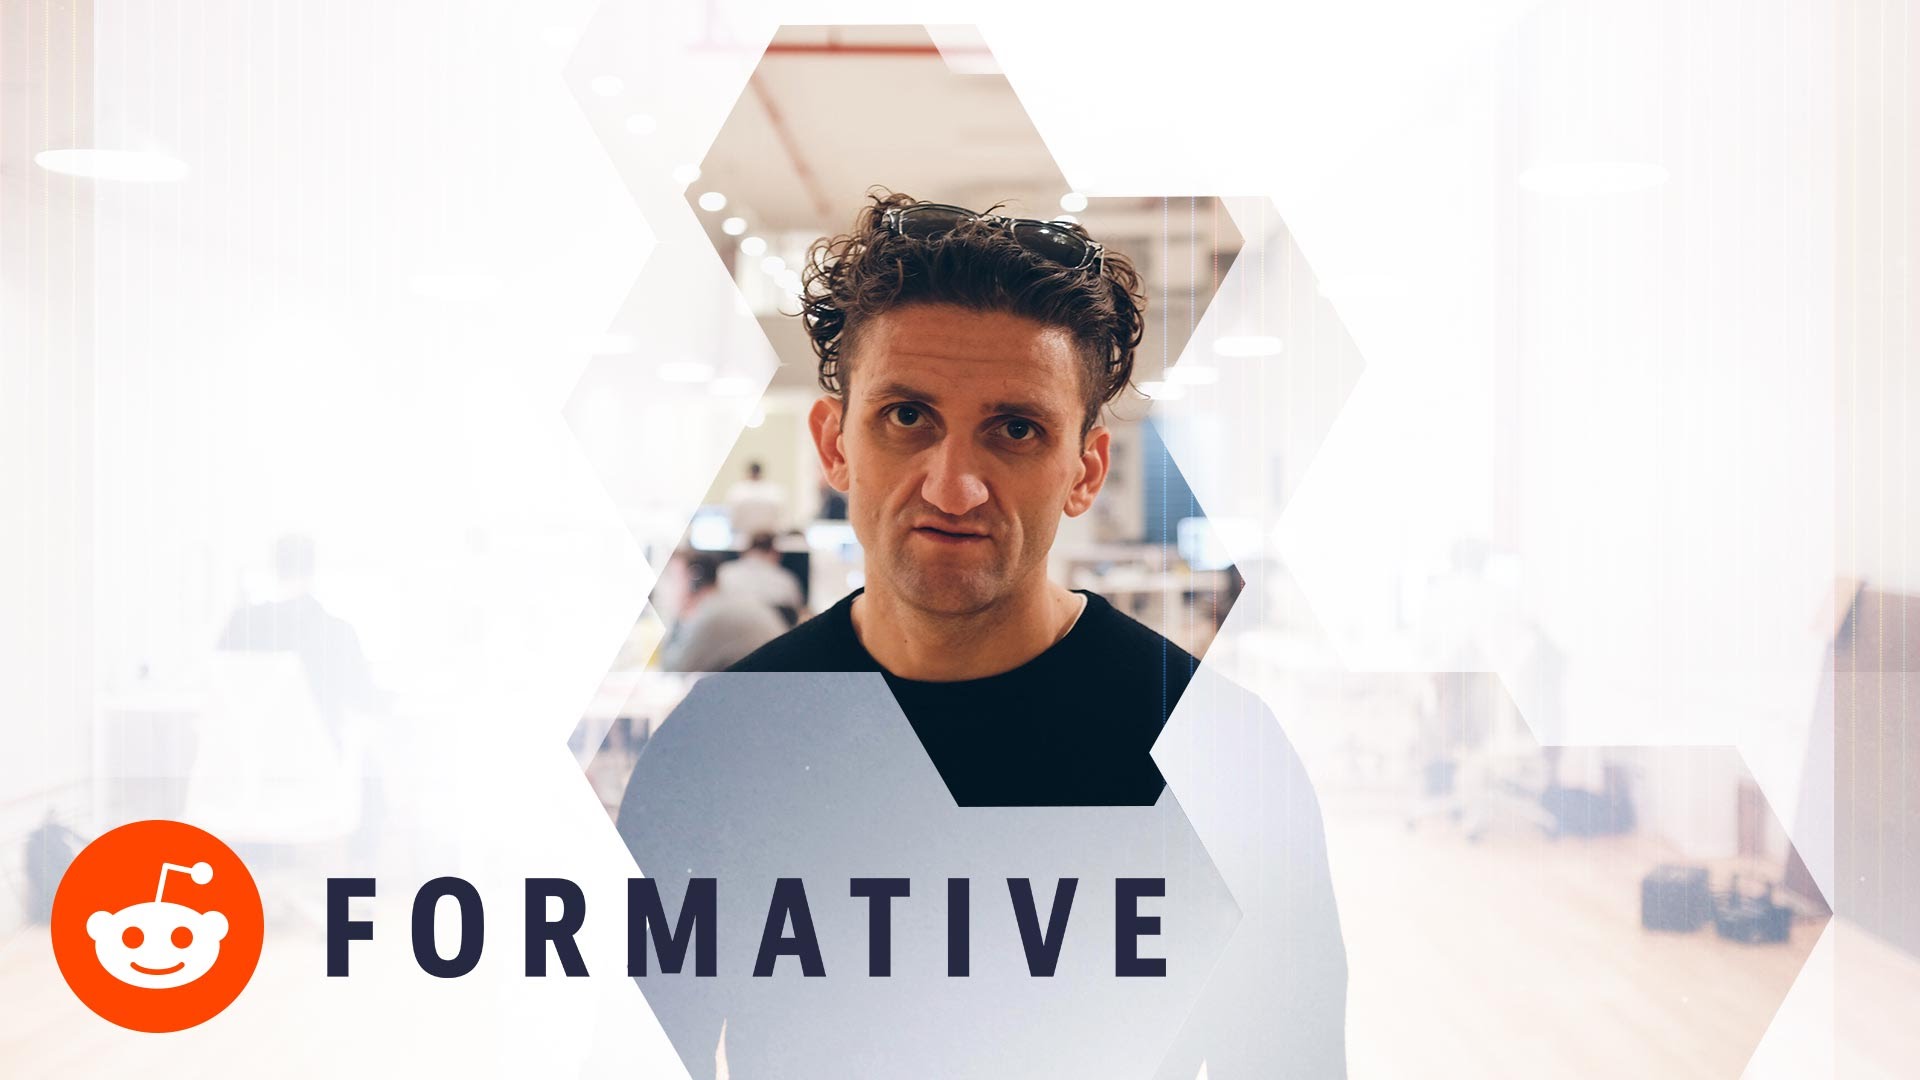 Casey Neistat’s Formative Moment